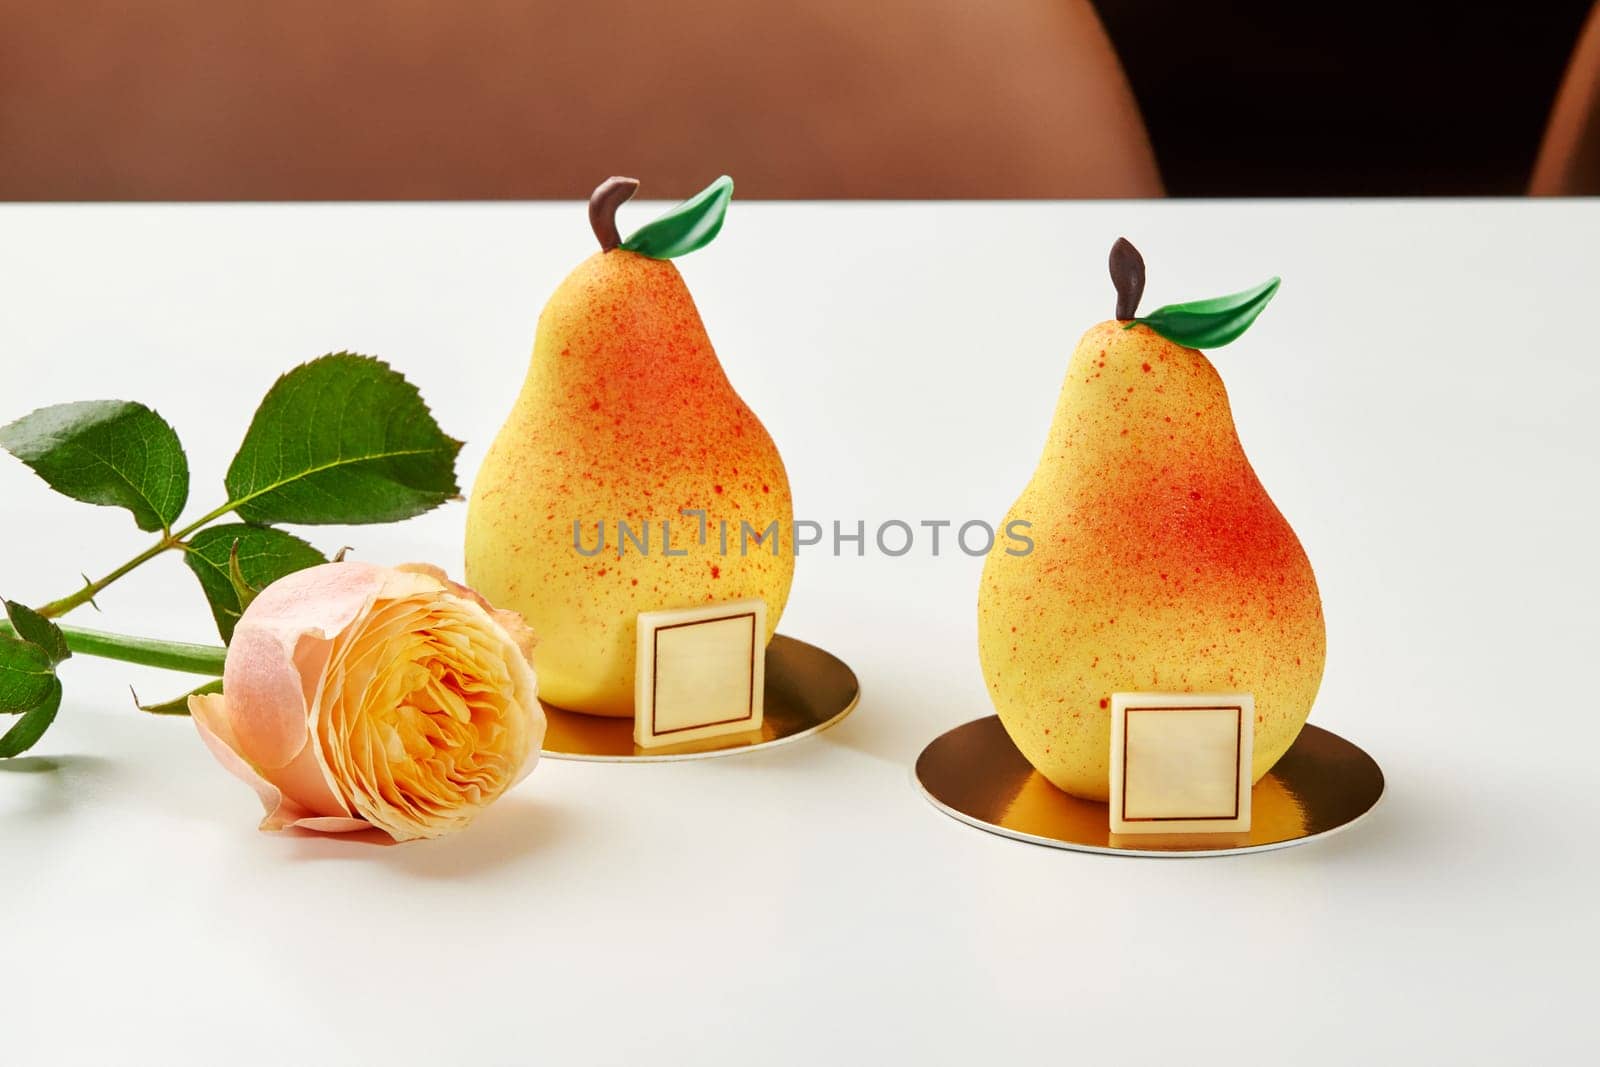 Exquisite pear-shaped pastries with delicate rose on white by nazarovsergey